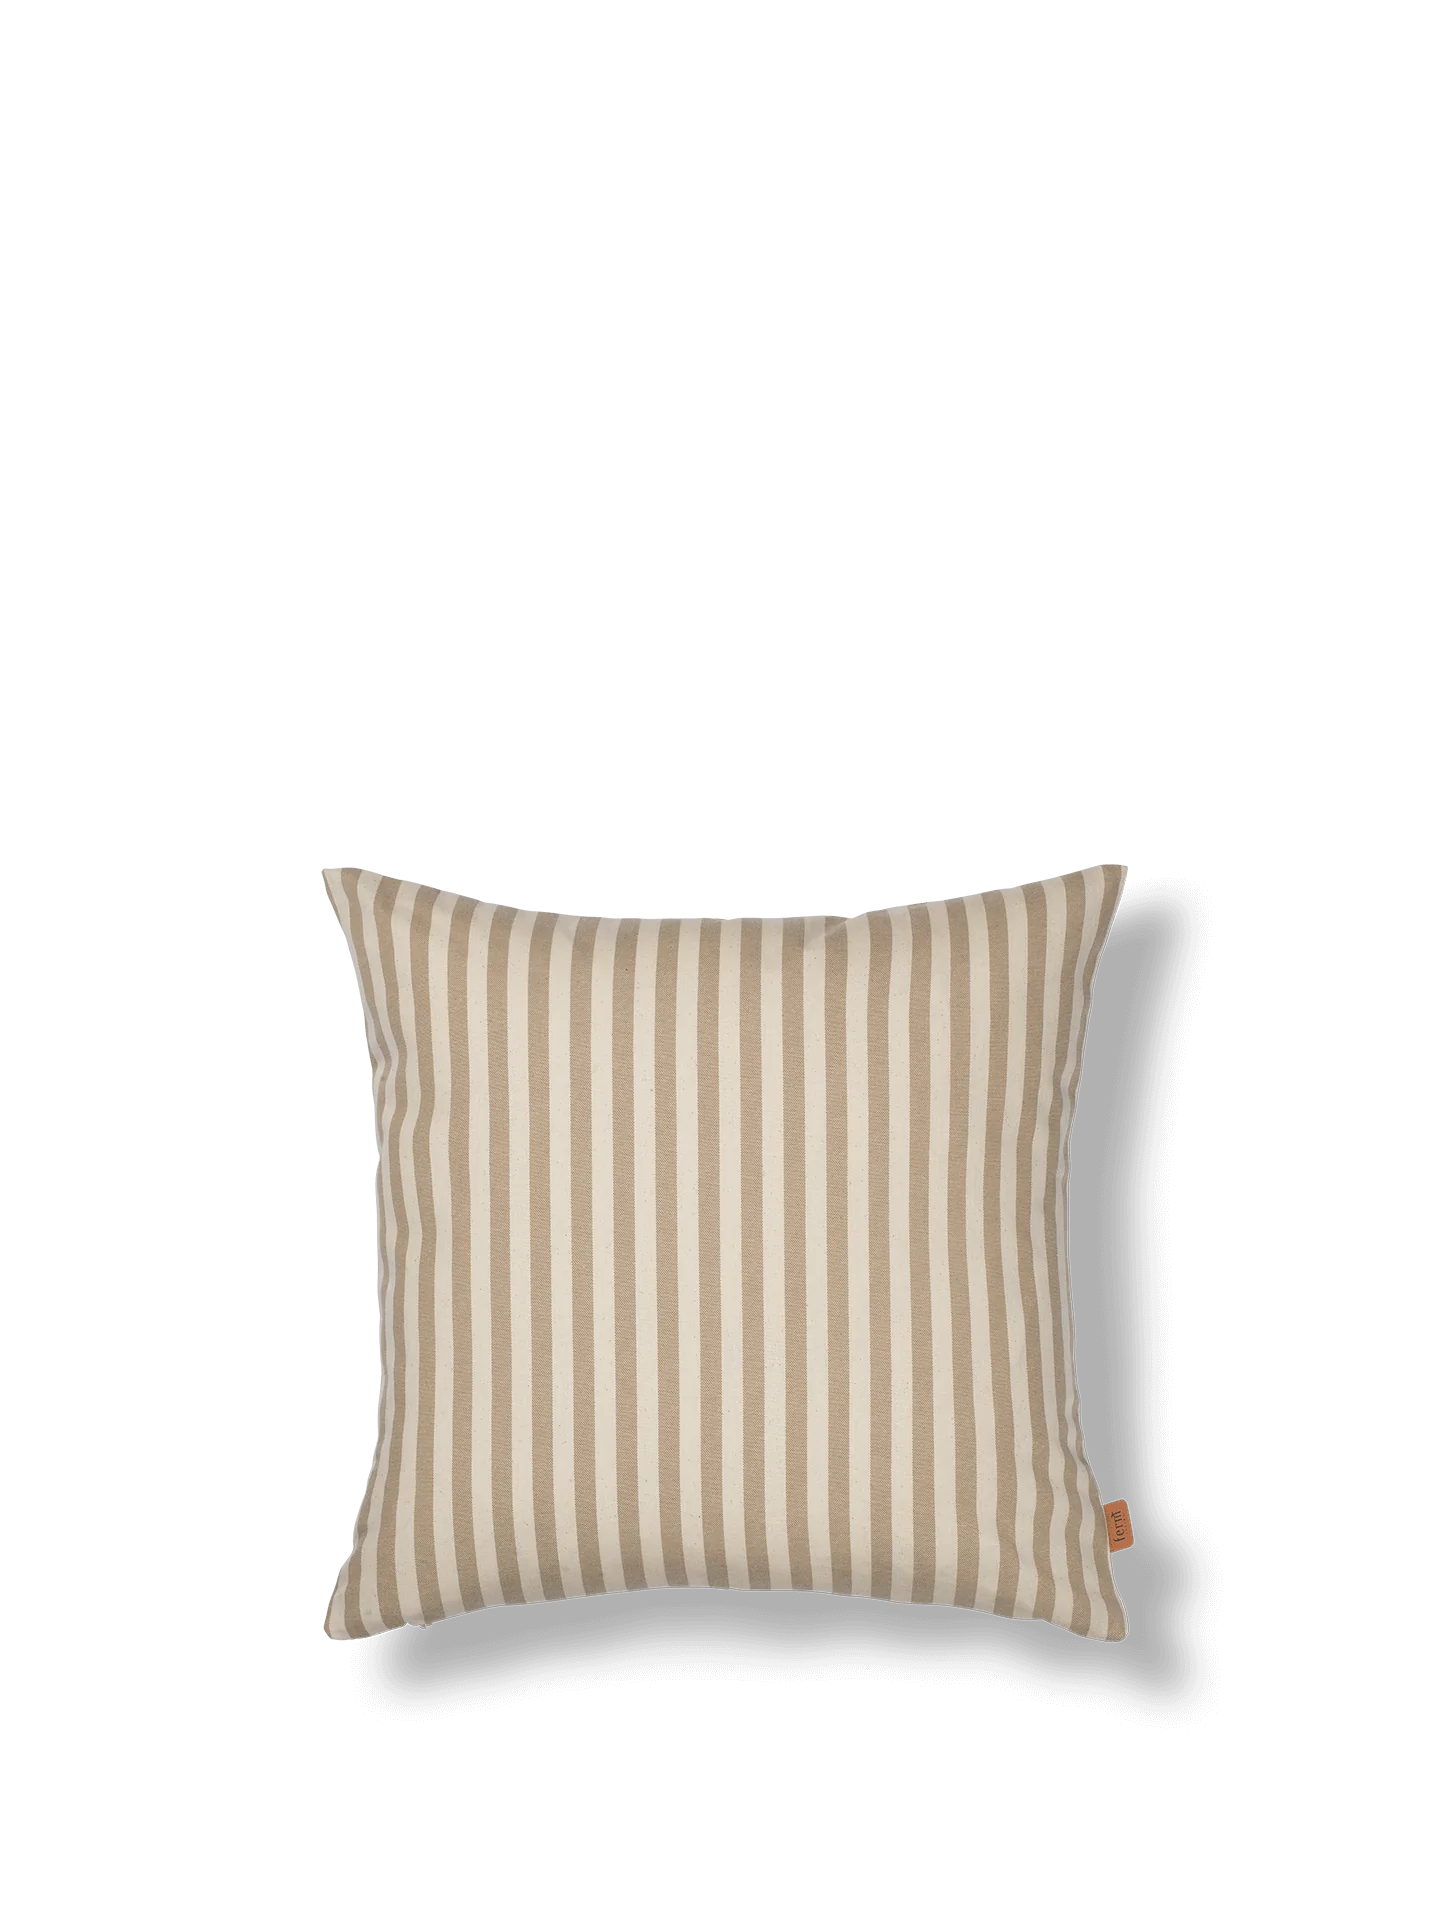 Ferm Living Strand Outdoor Cushion - Sand/Off-White